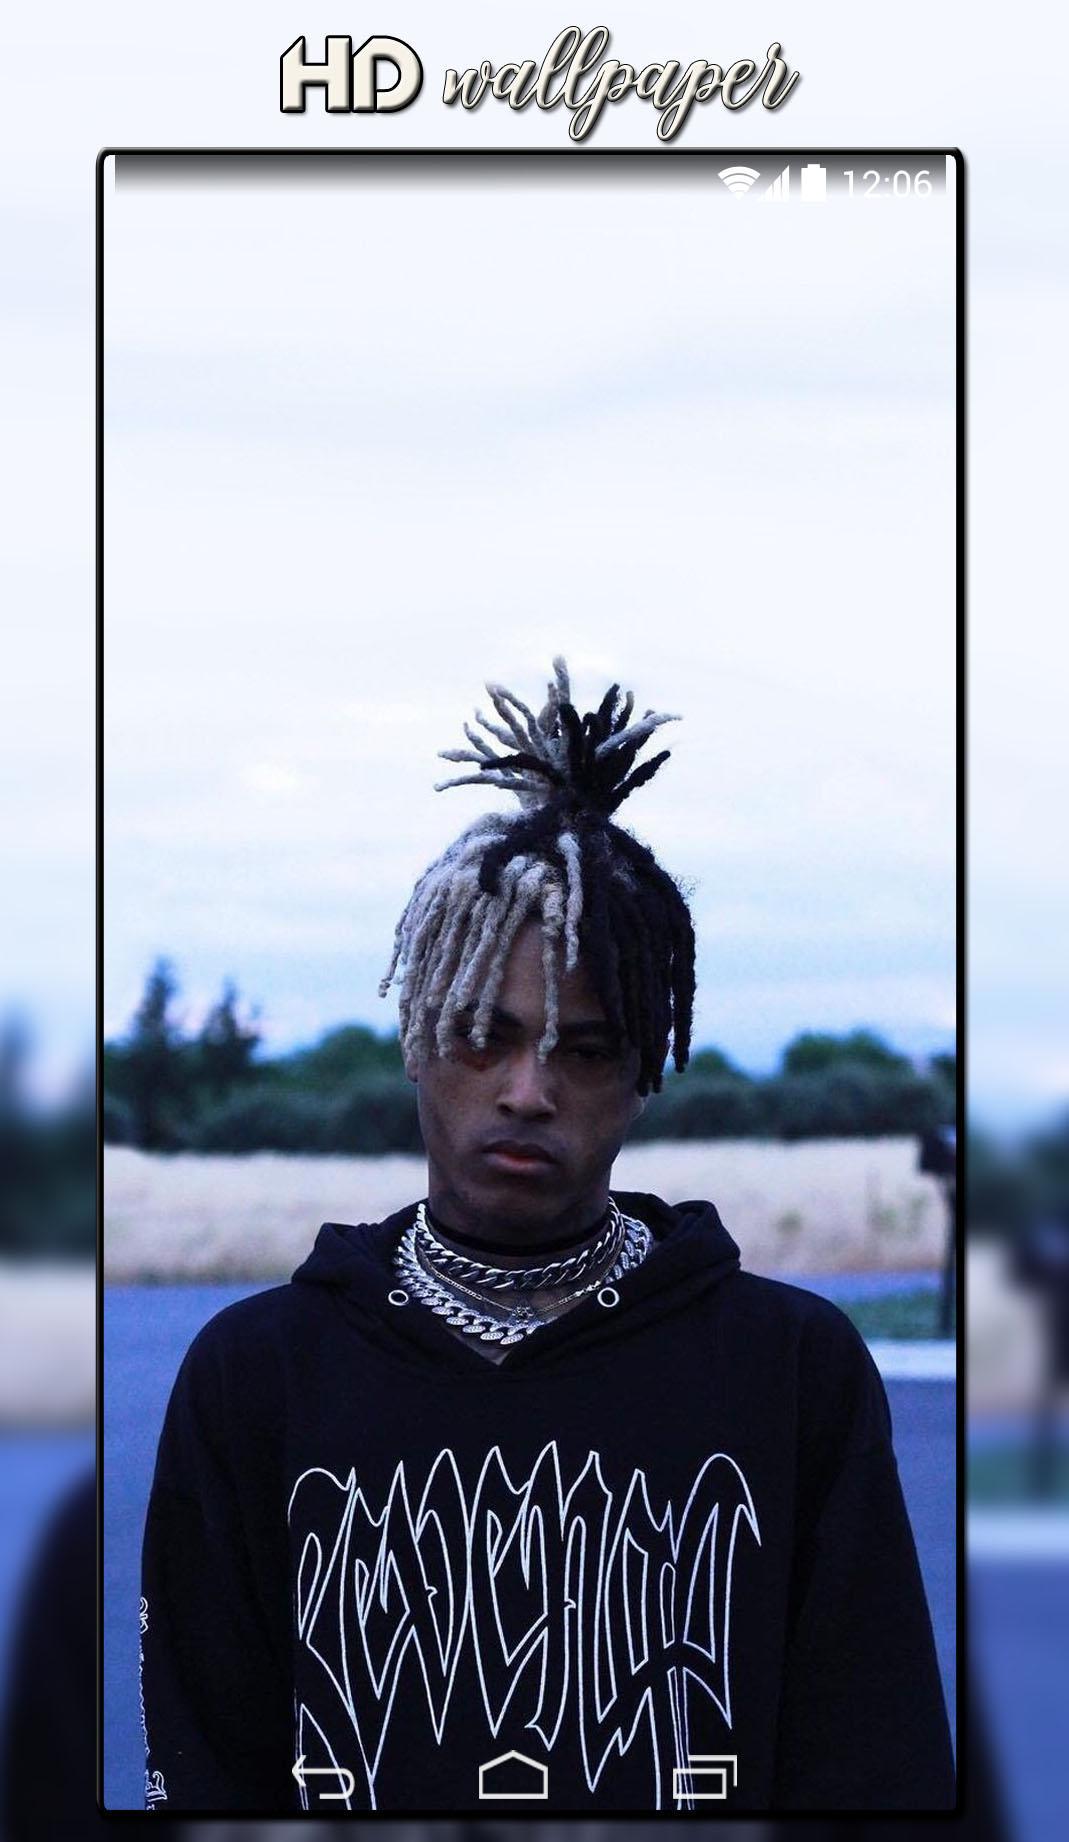 XXXTentacion Wallpaper HD (RIP) for Android